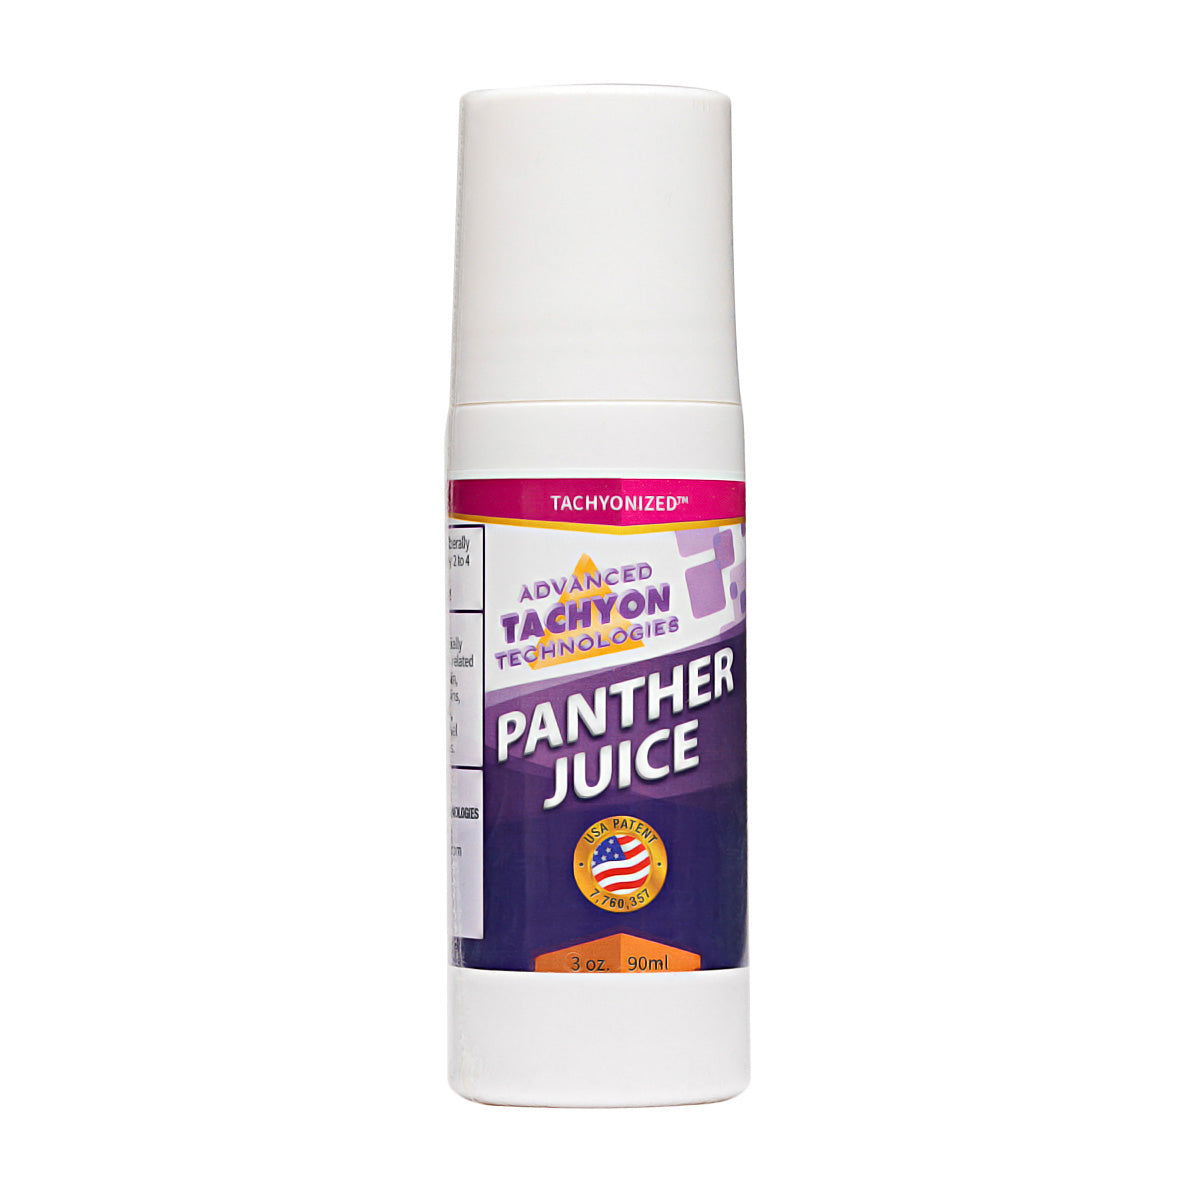 Panther Juice | ATT Tachyon | Raw Living UK | Pure Beauty | Advanced Tachyon Technologies Tachyonized Panther Juice is a blend of Aloe vera, MSM, B Vitamins, and over 200 trace elements that helps with pain &amp; swelling | Various Sizes | Roll-On